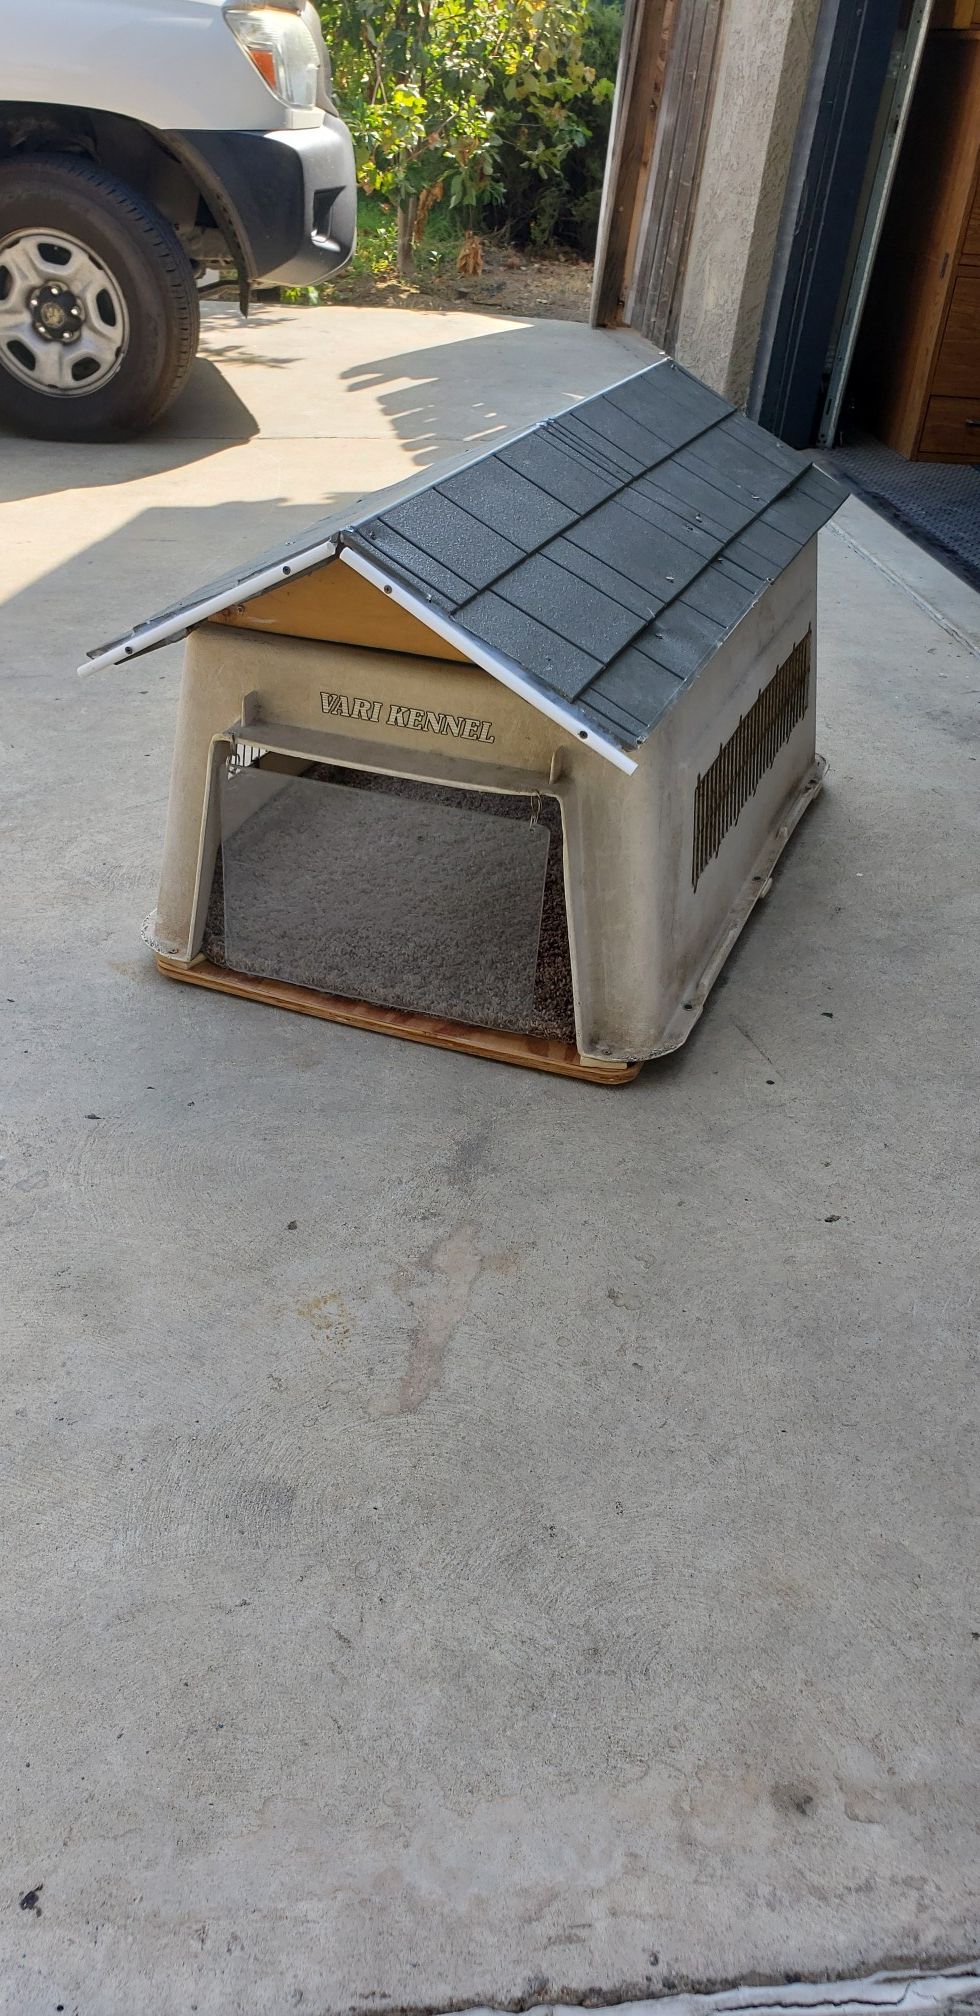 Reworked medium to large size doghouse